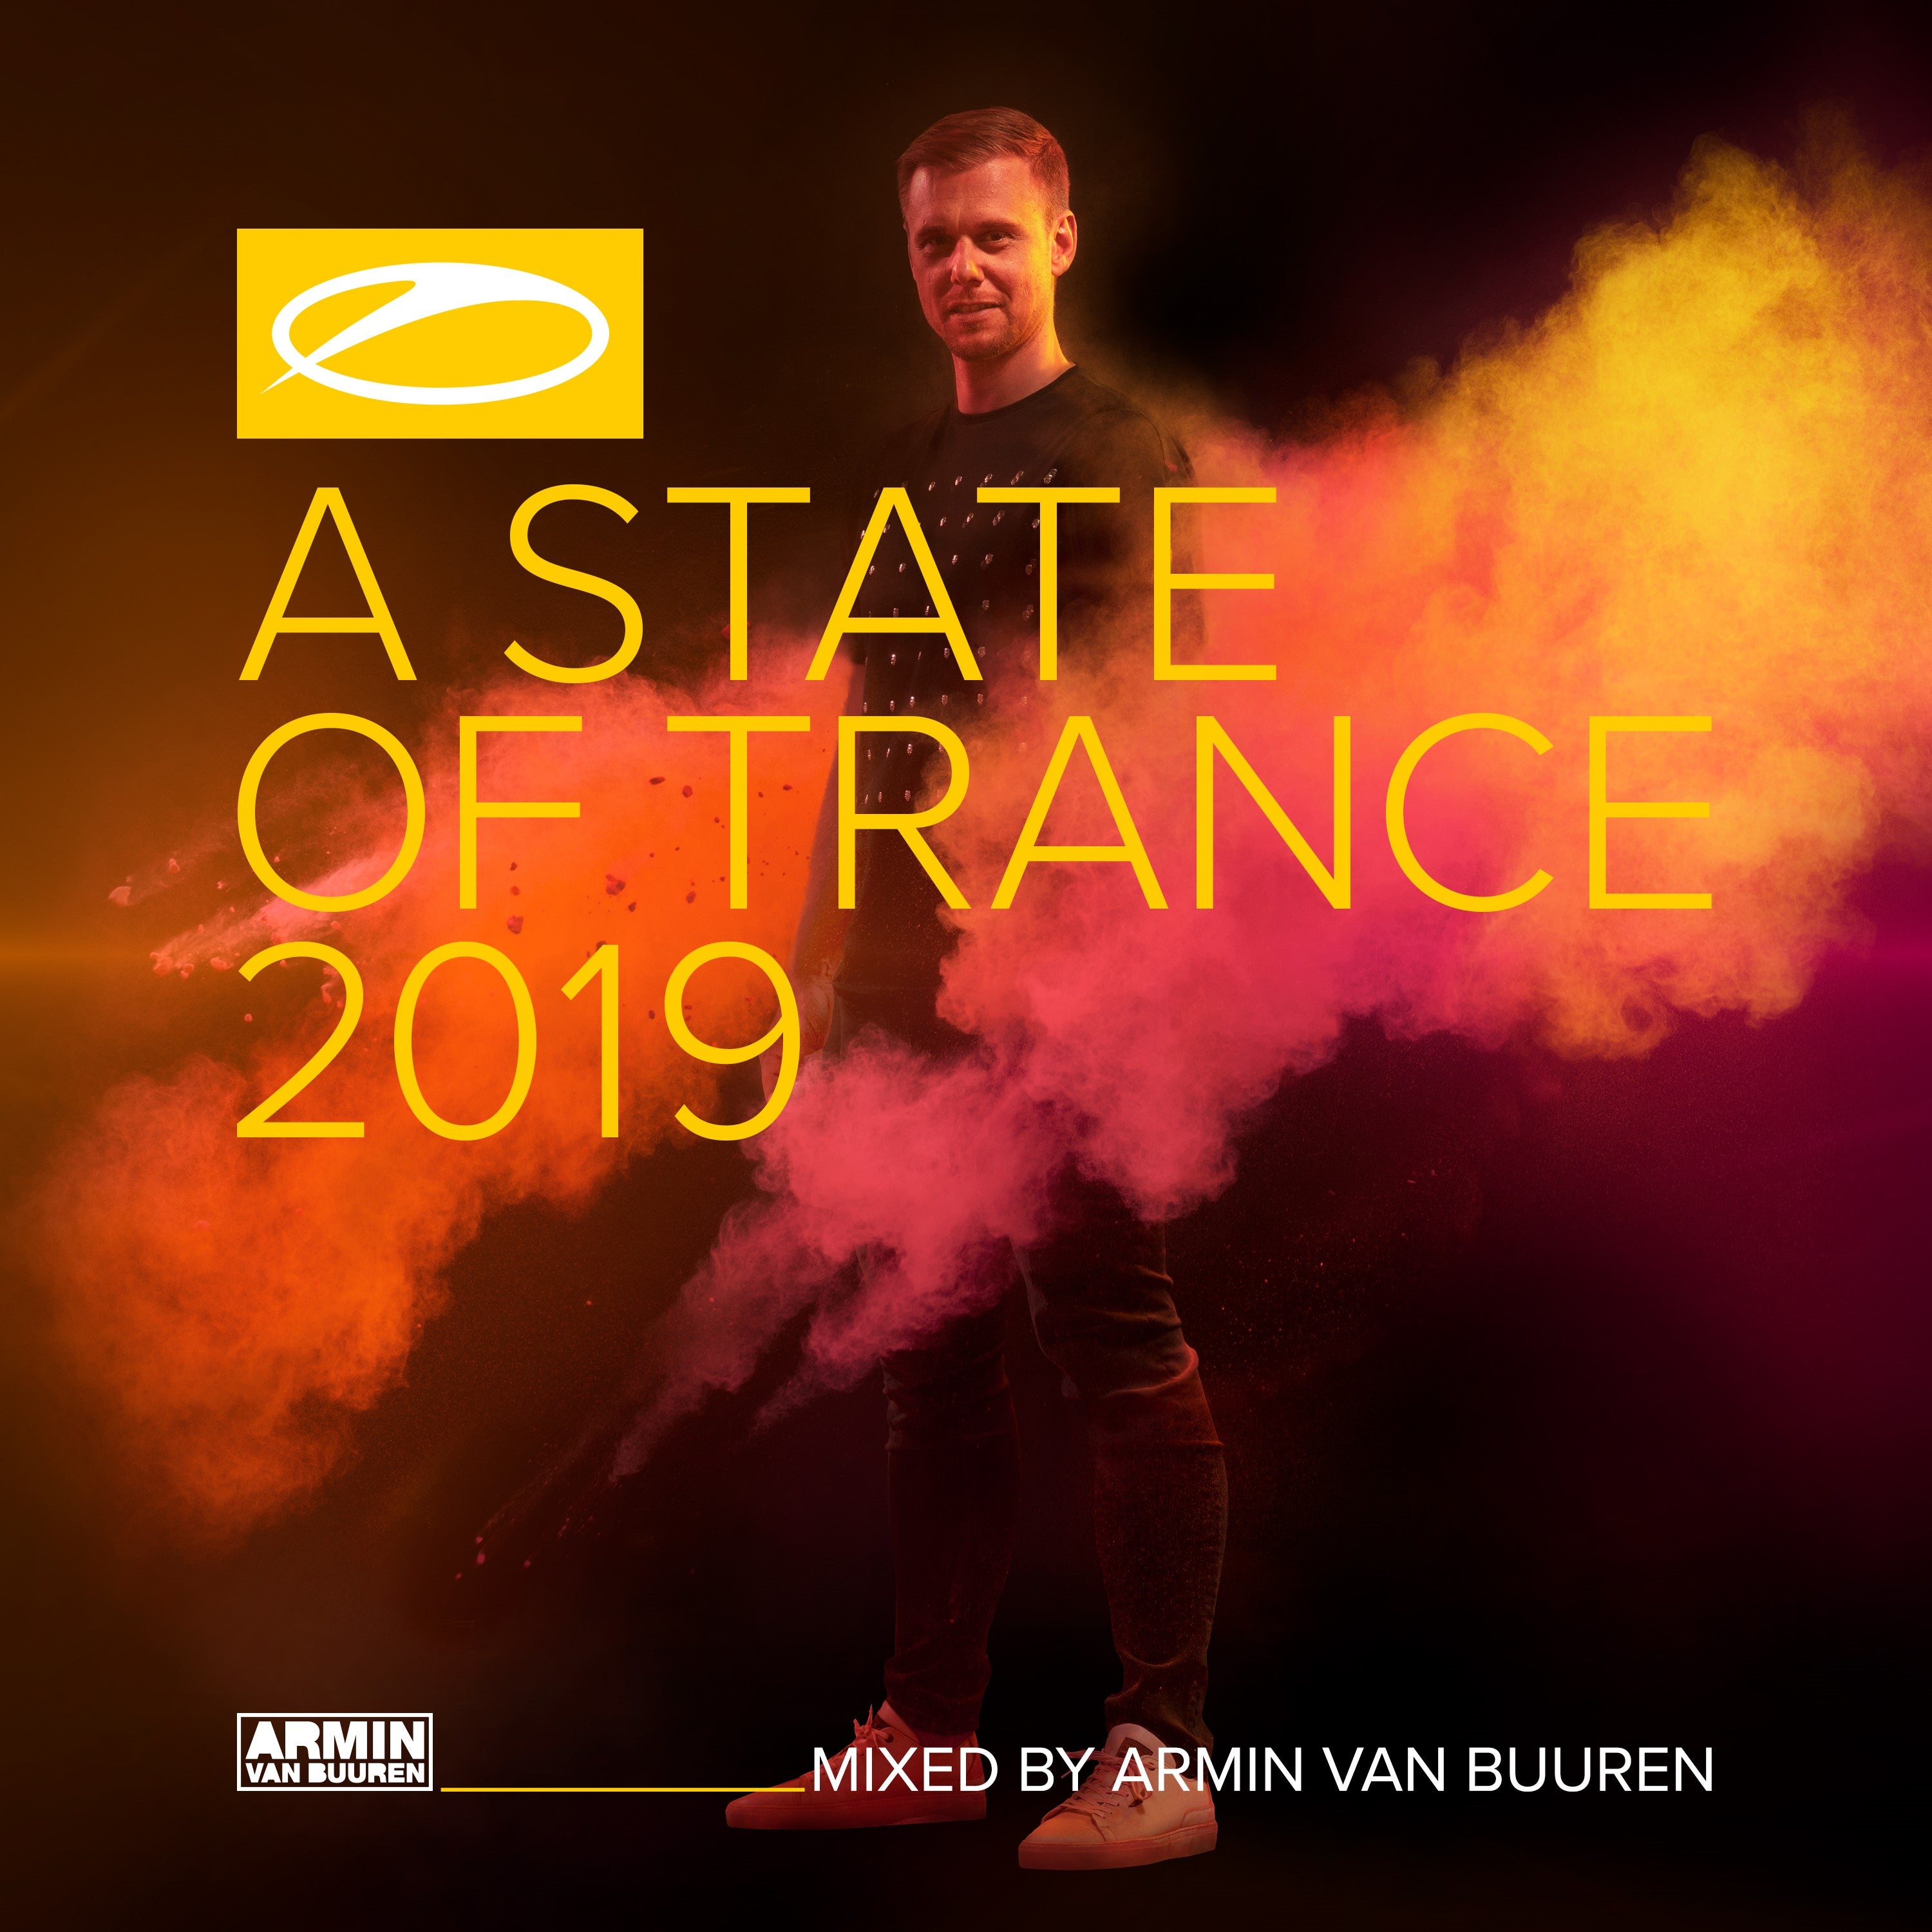 A State Of Trance A State Of Trance 2019 (Mixed by Armin van Buuren) - Official Armada Music  shop